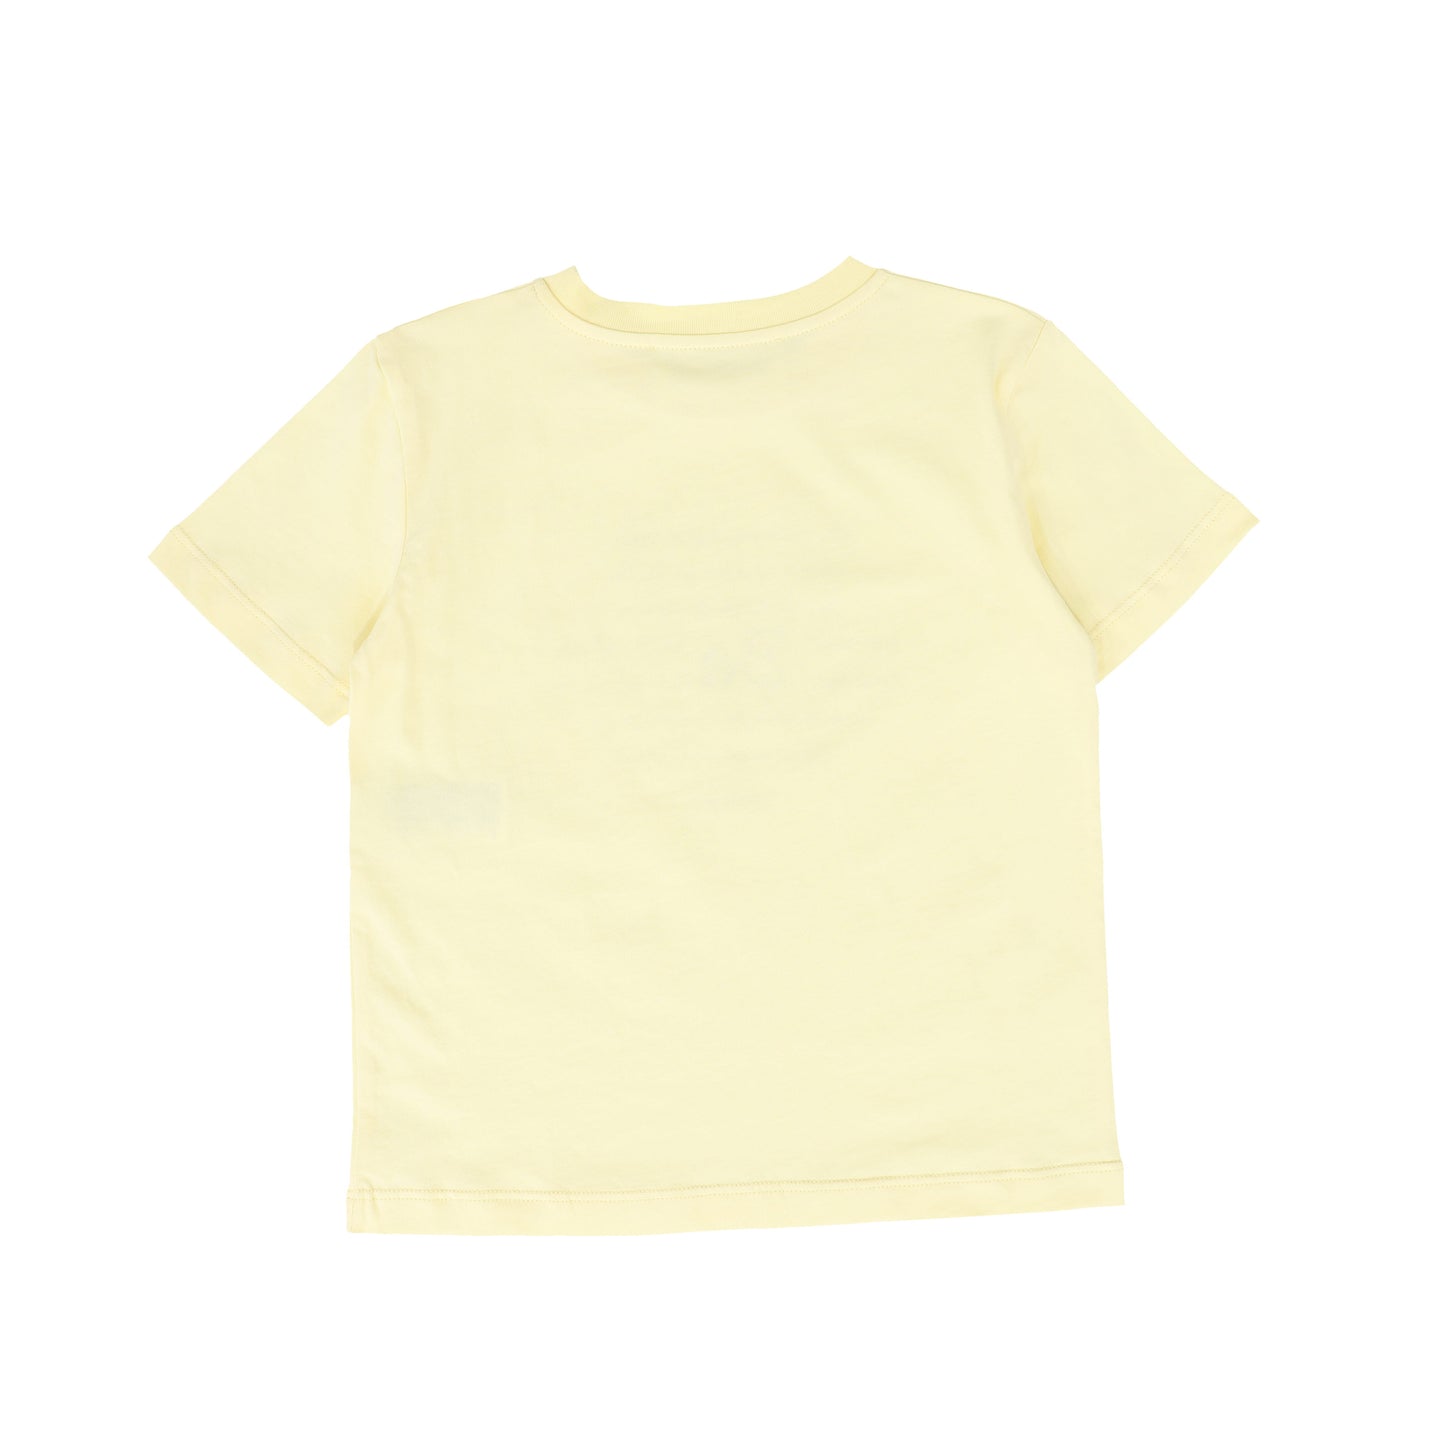 BE FOR ALL YELLOW WORDED TEE [FINAL SALE]